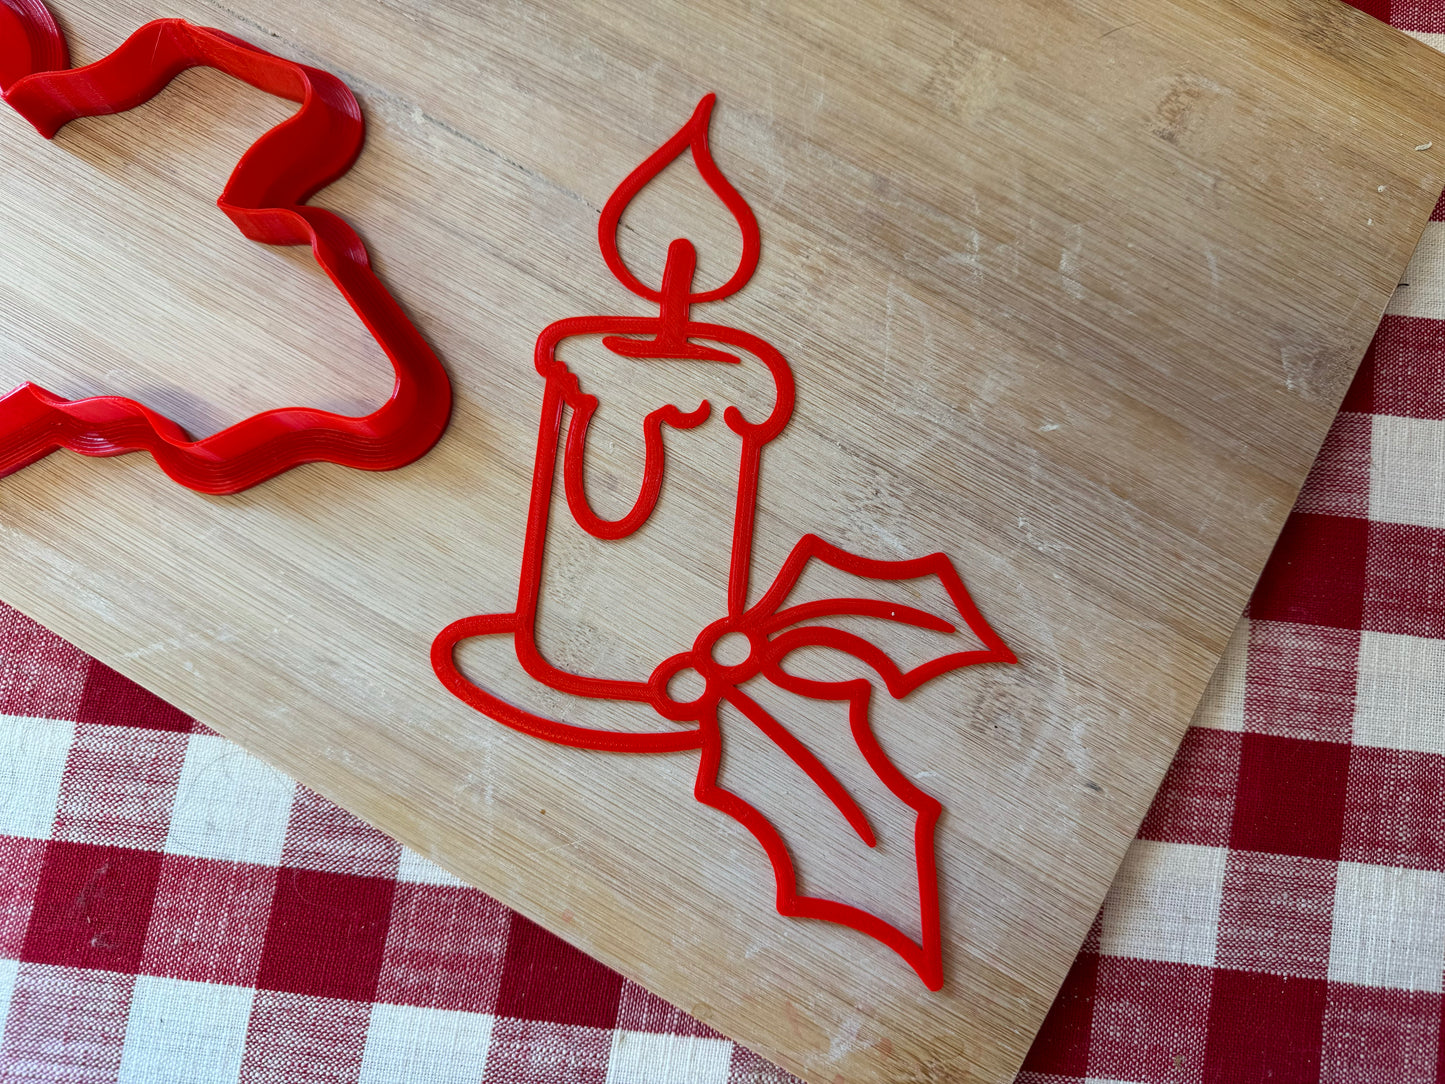 Candle design, pottery stamp or stencil w/ optional cutter -  plastic 3D printed, multiple sizes